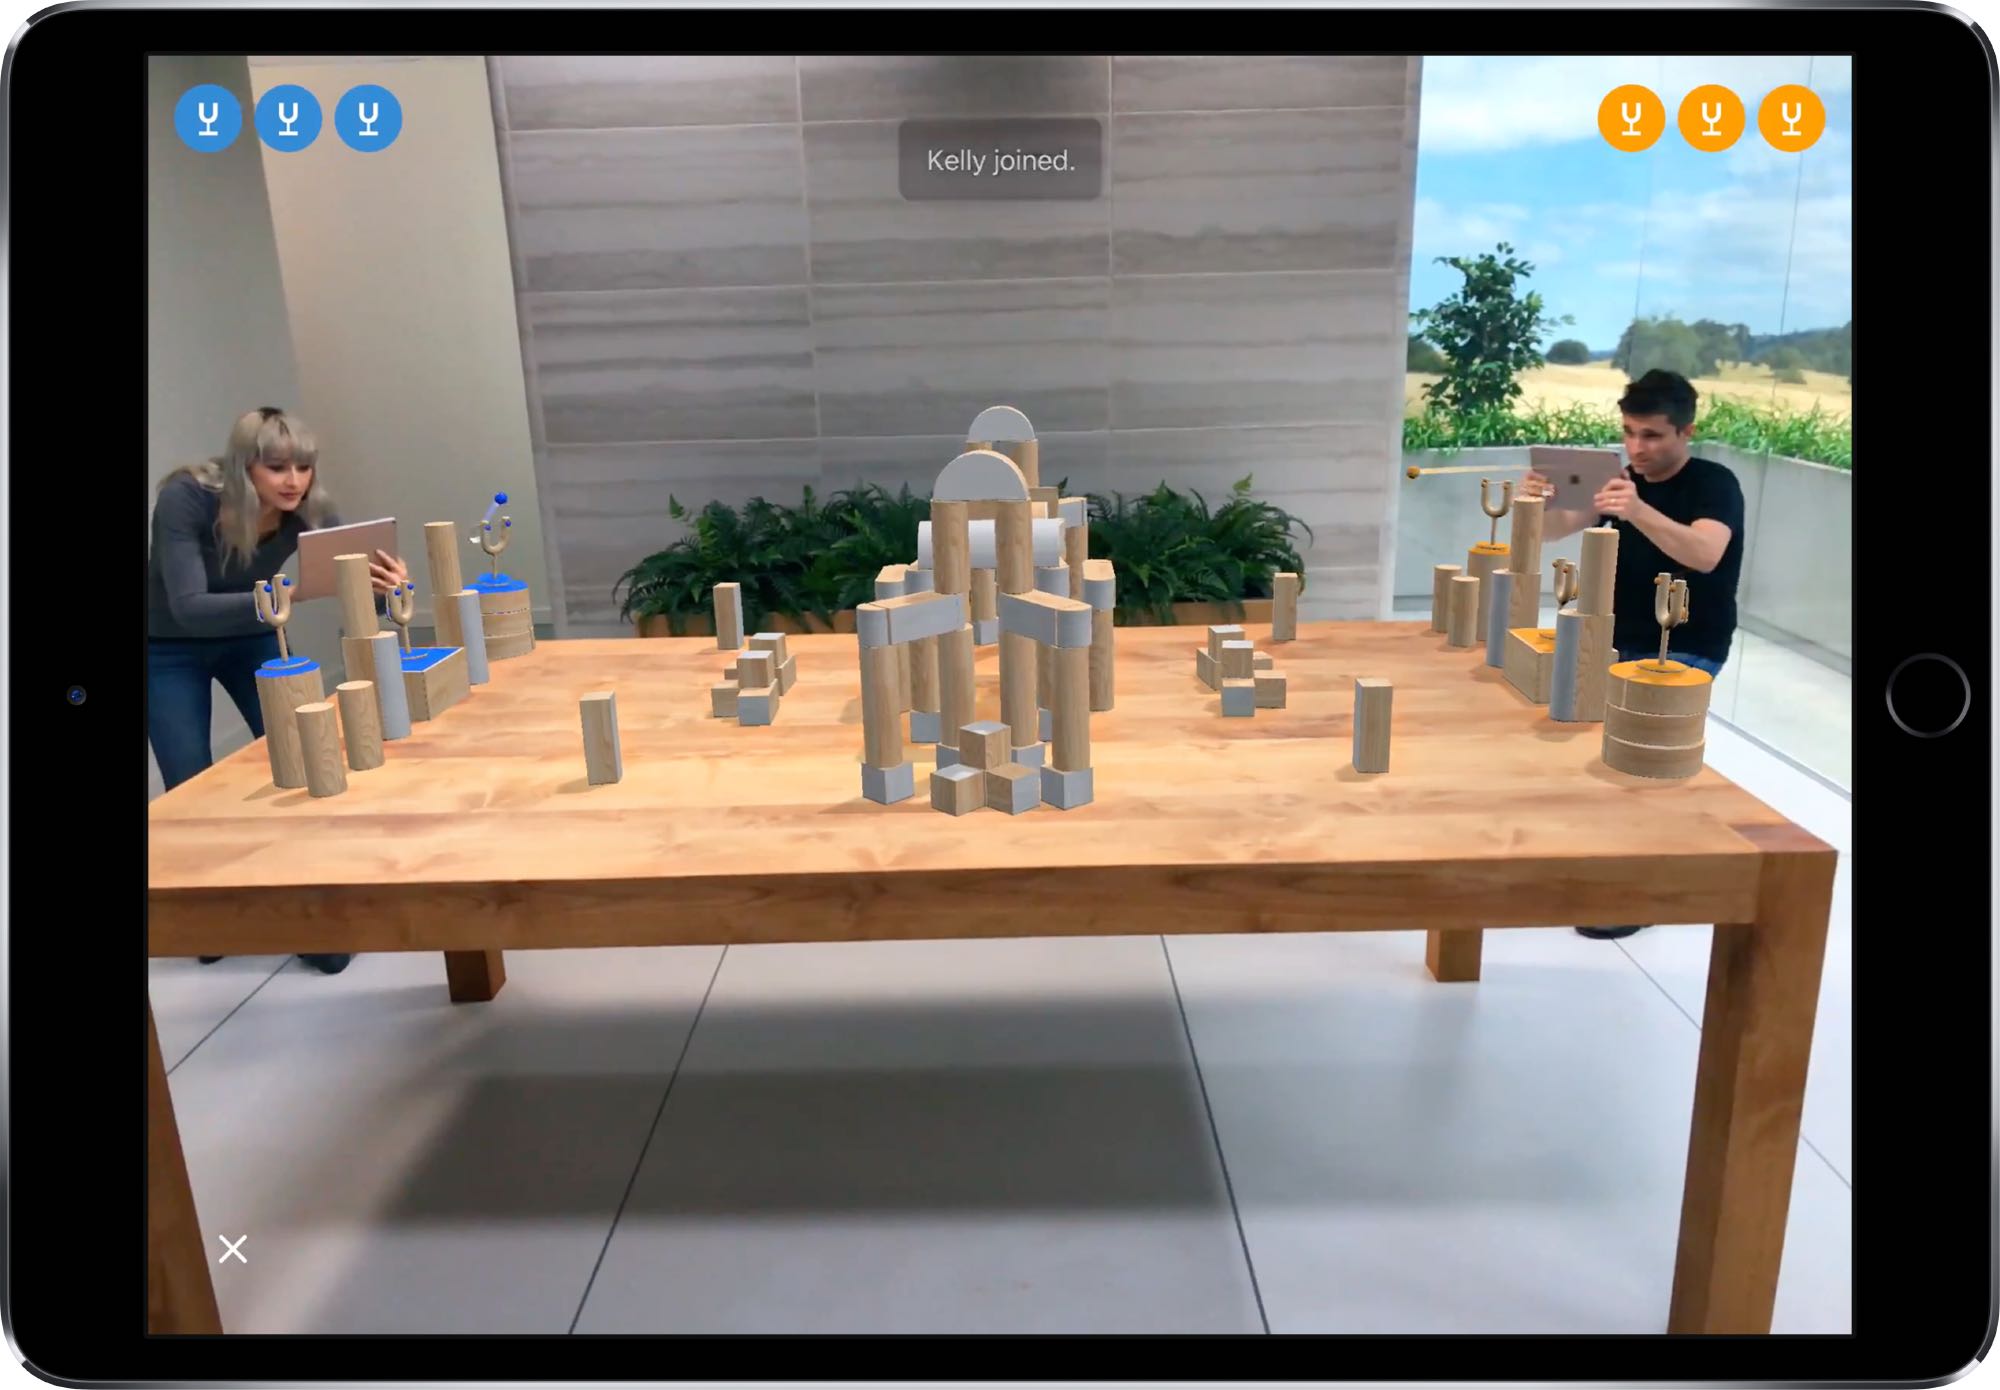 The Apple Store app is implementing augmented reality shopping